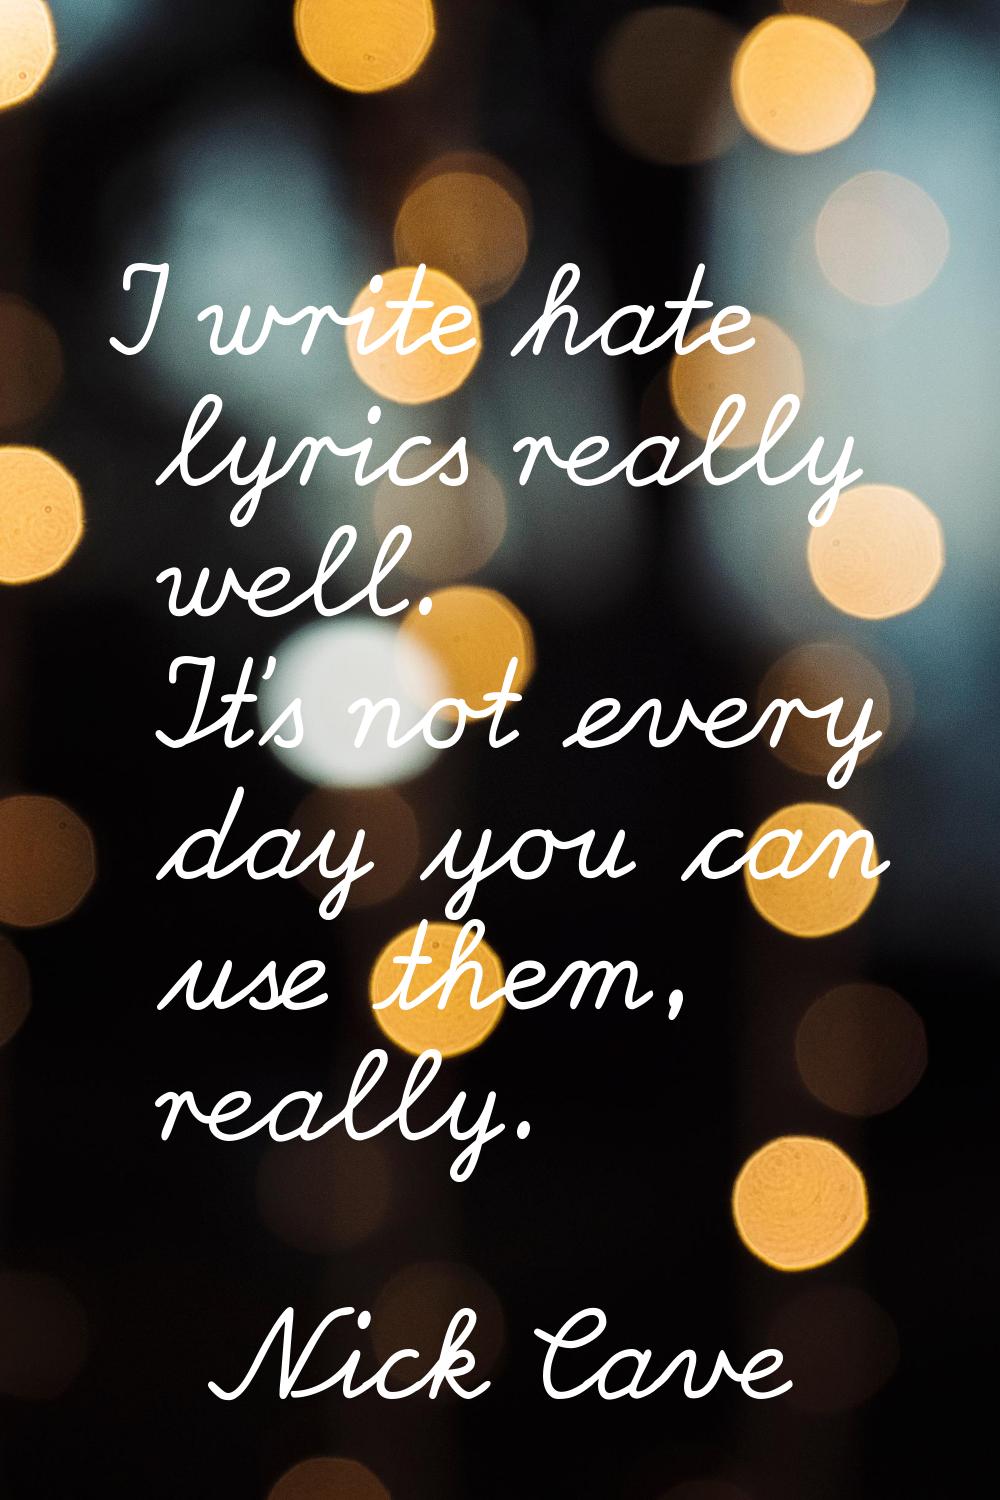 I write hate lyrics really well. It's not every day you can use them, really.